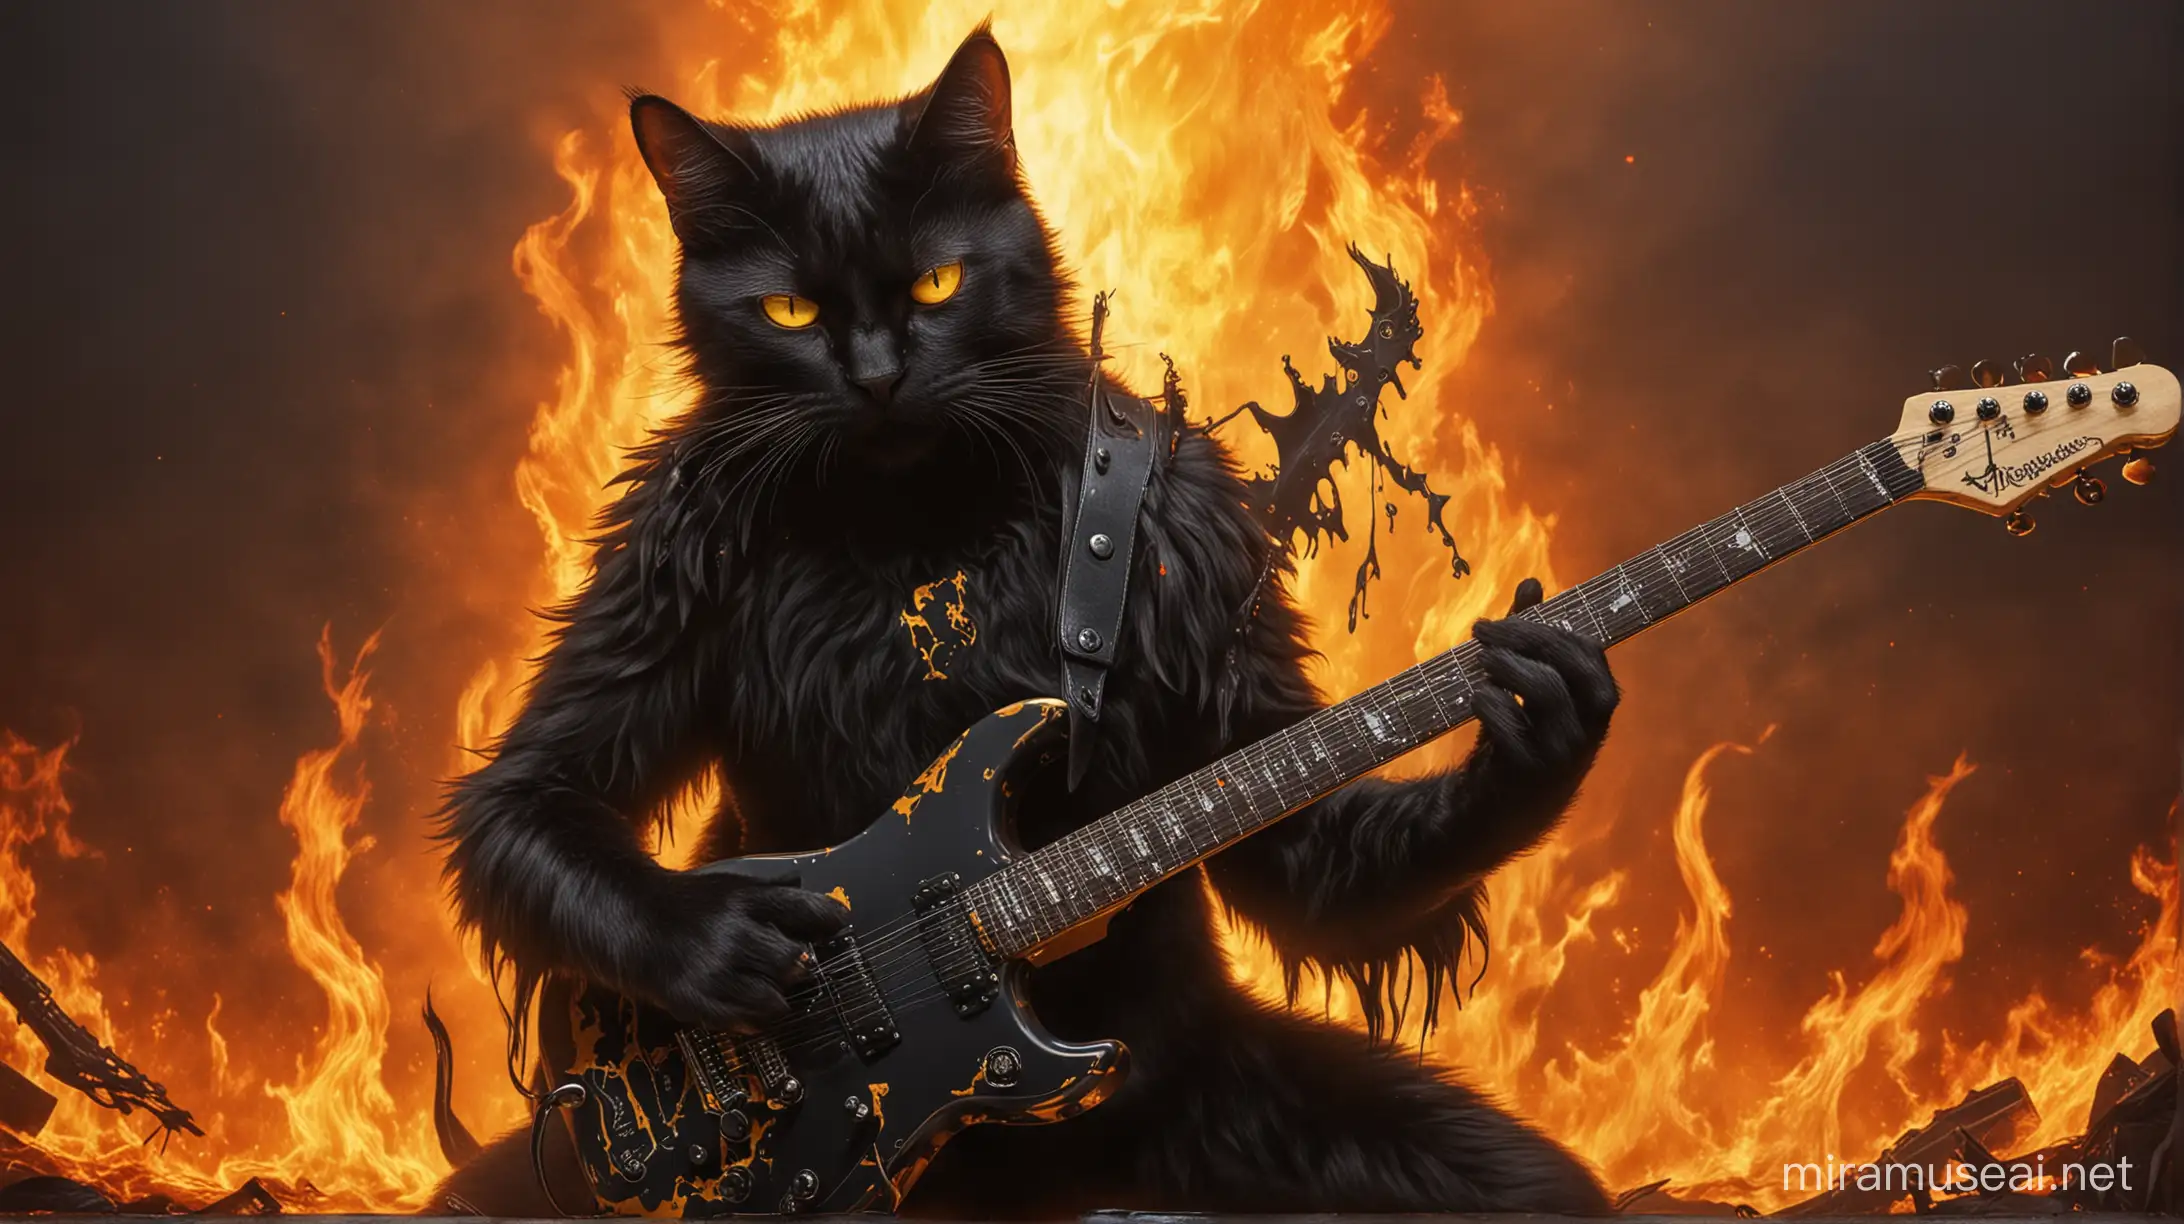 Sinister Black Cat with Electric Guitar Amidst Fiery Inferno